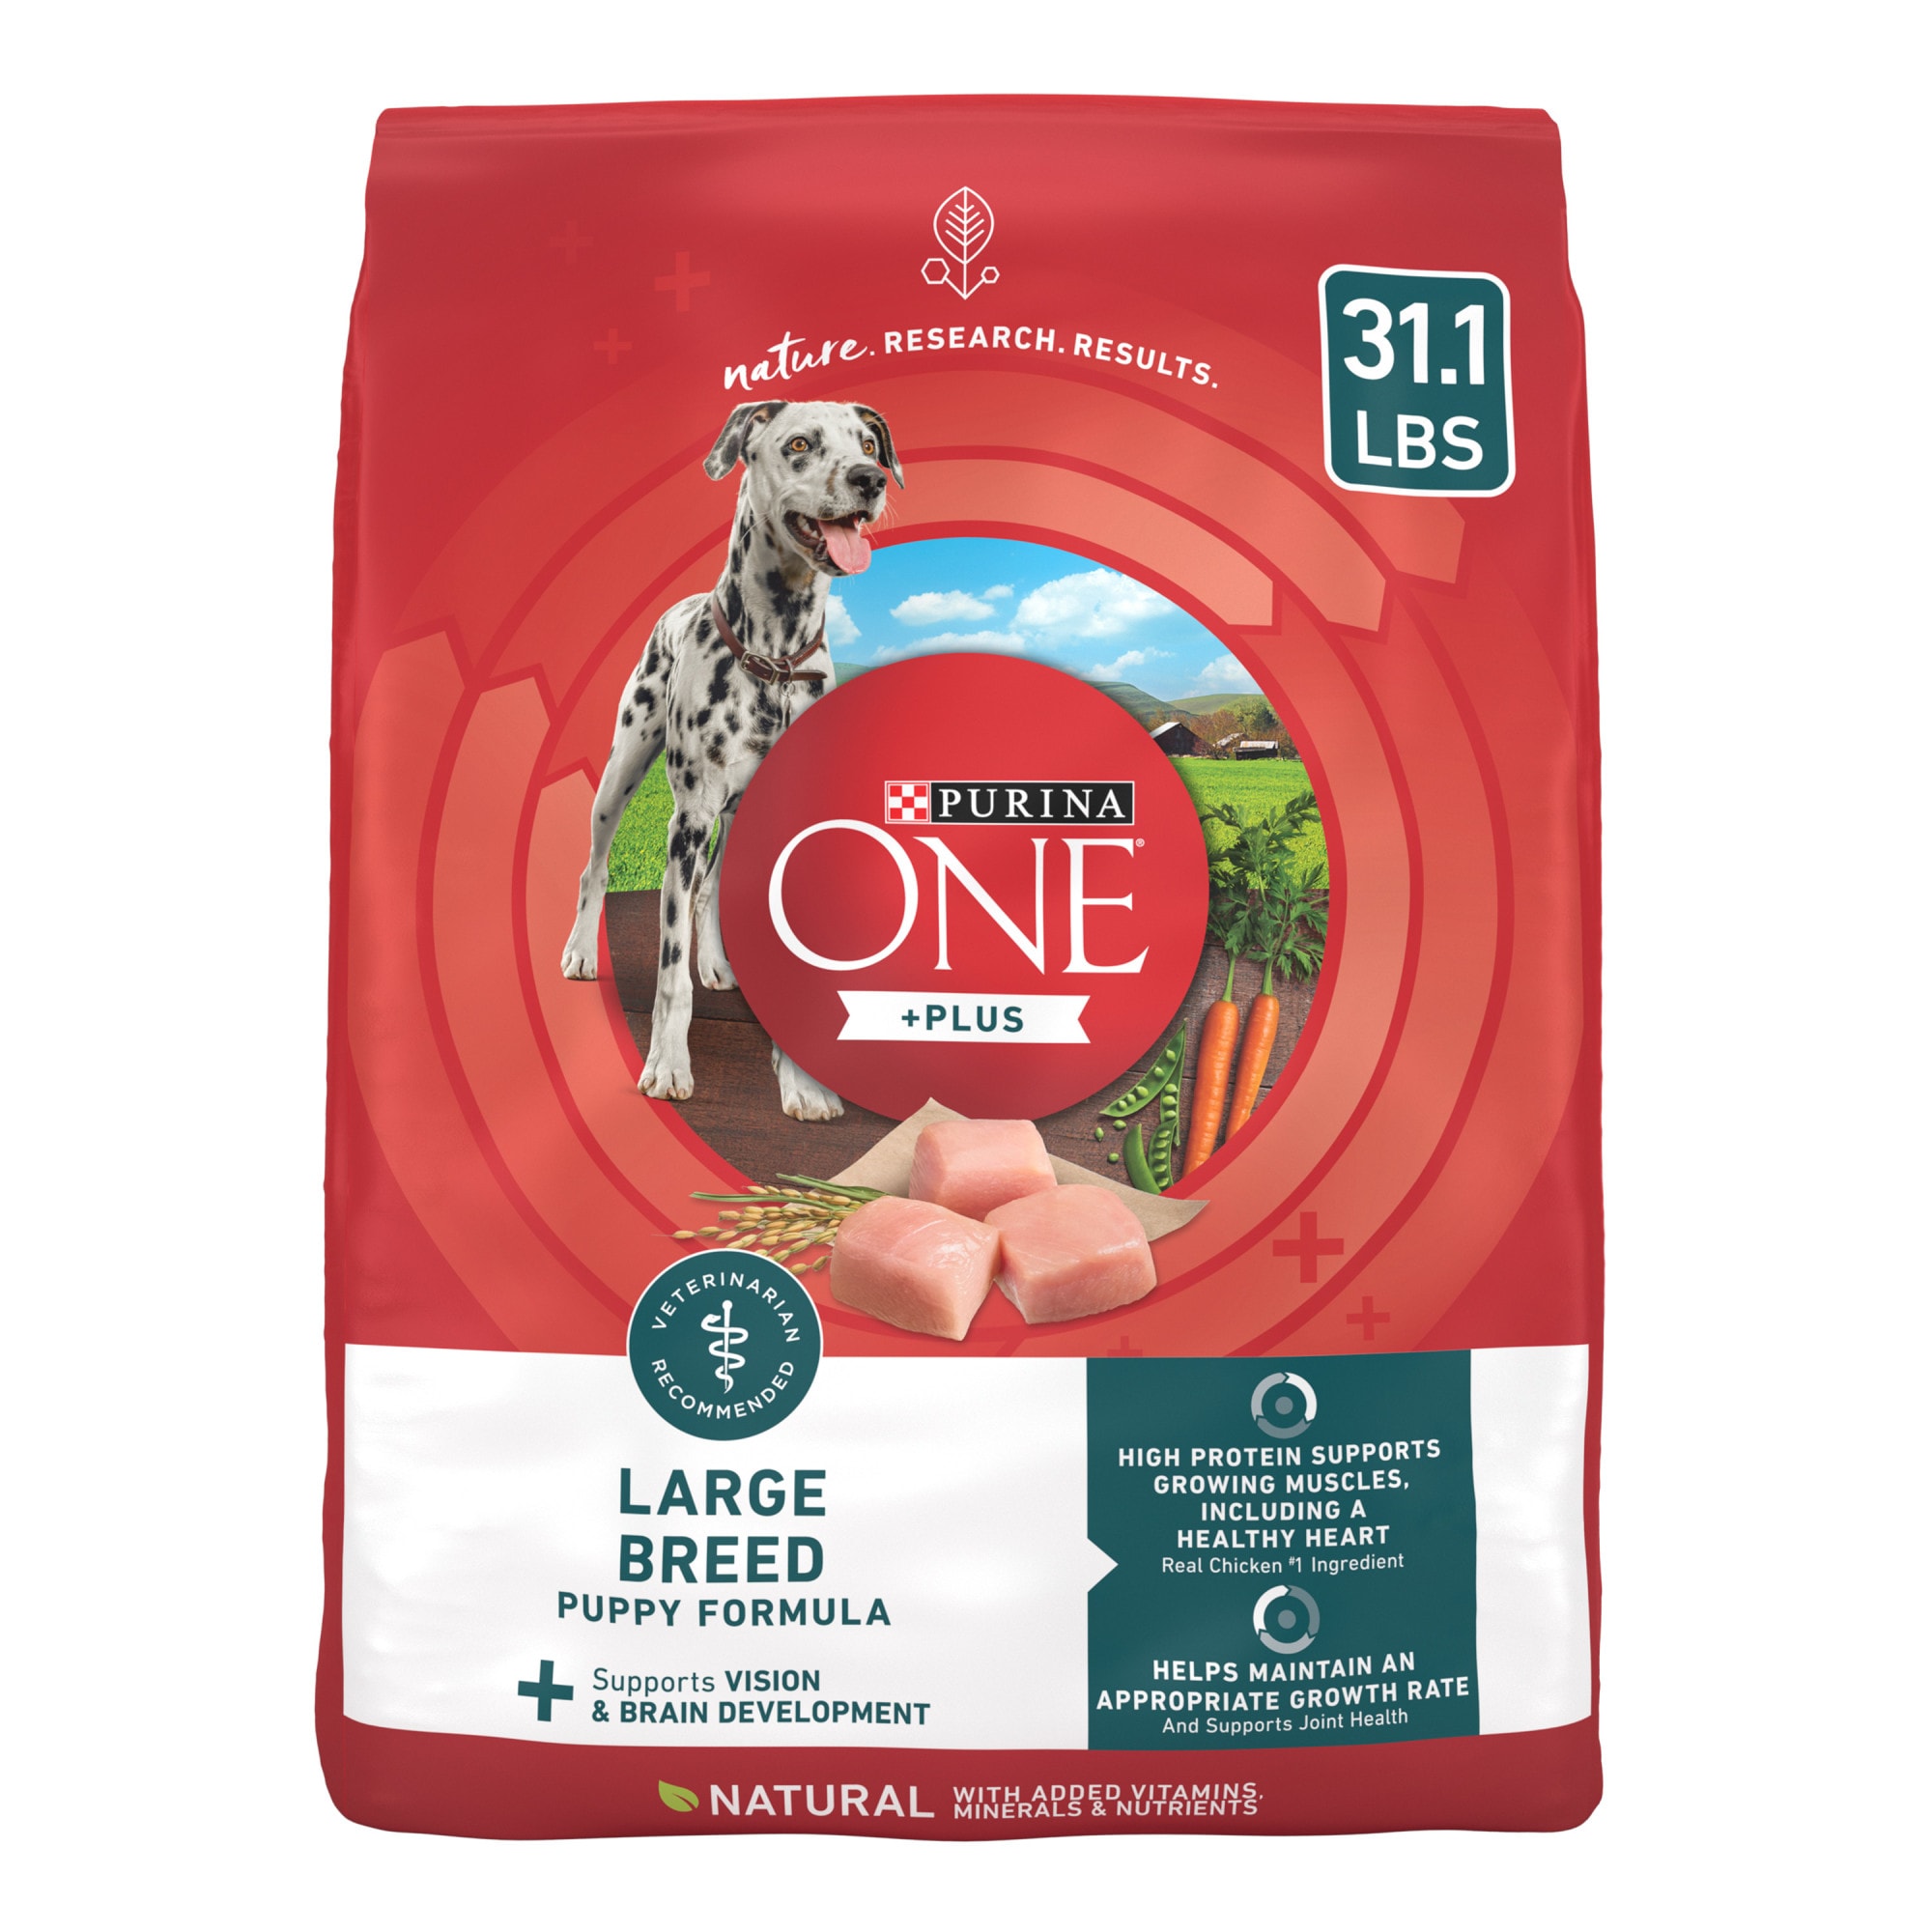 purina-one-plus-large-breed-formula-dry-puppy-food-31-1-lbs-petco